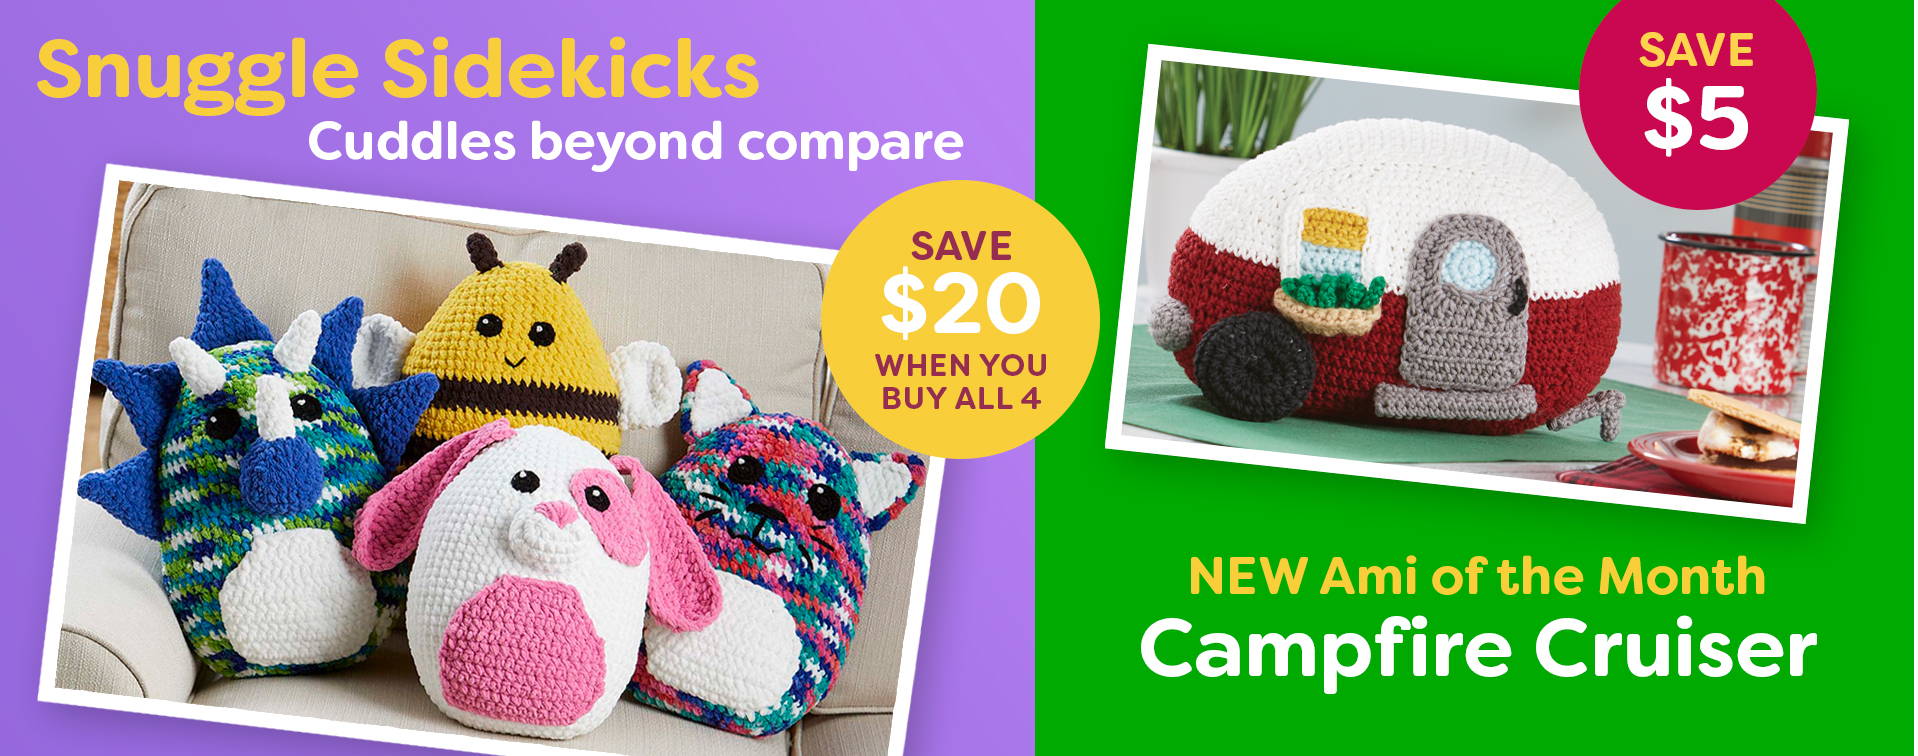 Save $20 when you buy all 4 Snuggle Sidekicks (shown in left image). Save $5 on the New Ami of the Month: Campfire Cruiser (shown in right image)